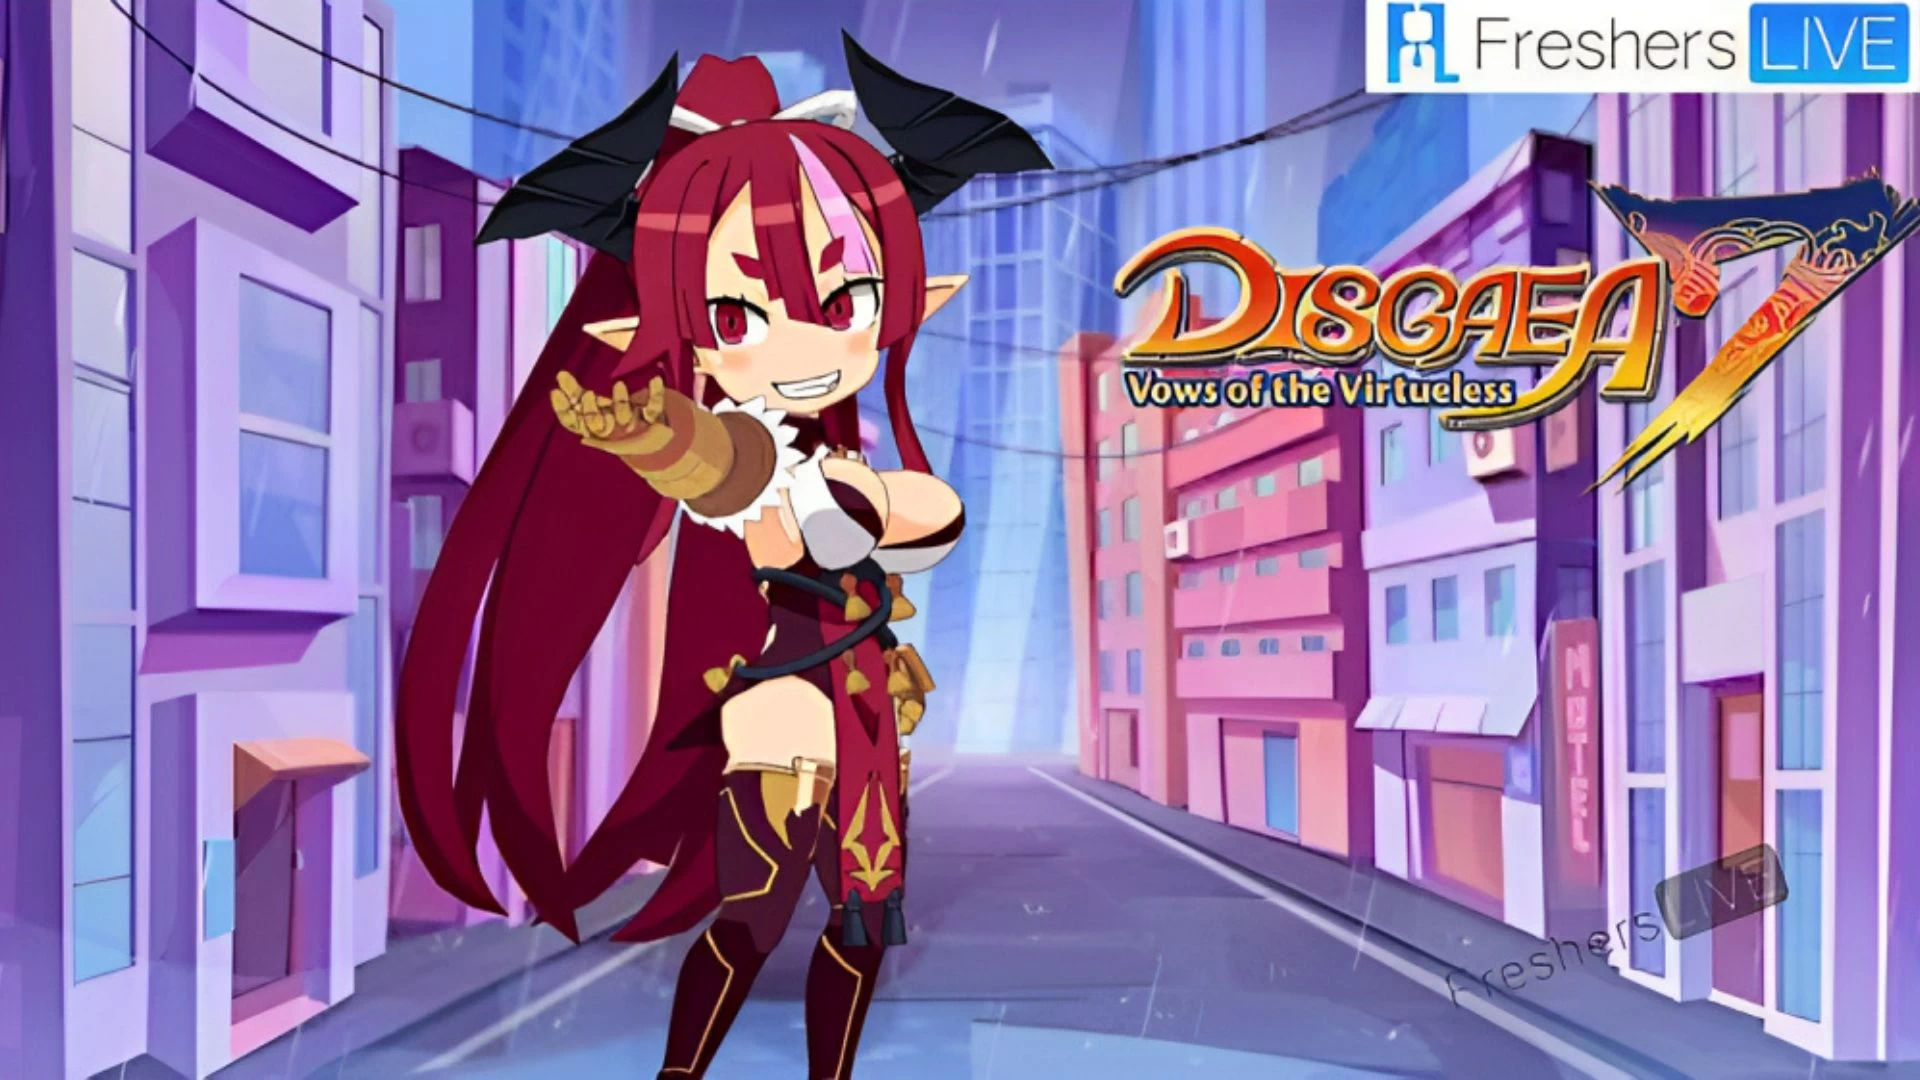 How to Beat Giant Yeyasu in Disgaea 7? Find Out Here